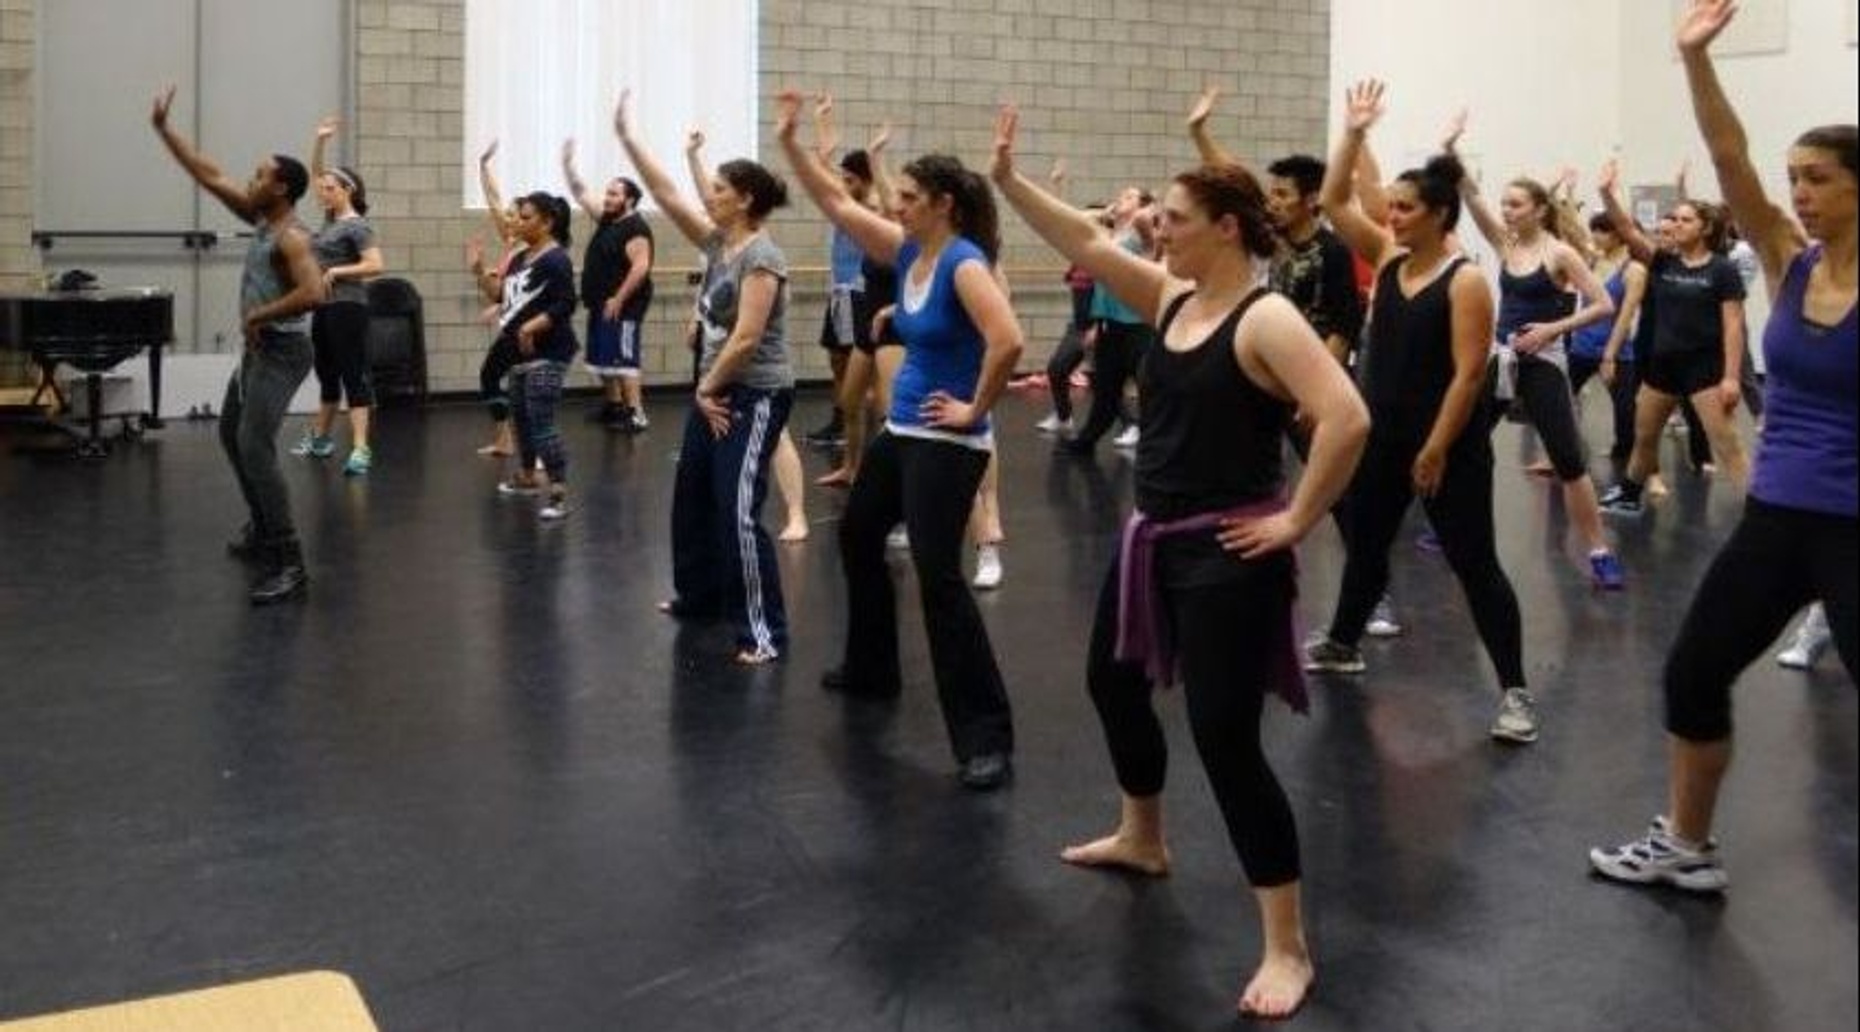 10-Class Pass to Repertory Dance Theater in Salt Lake City